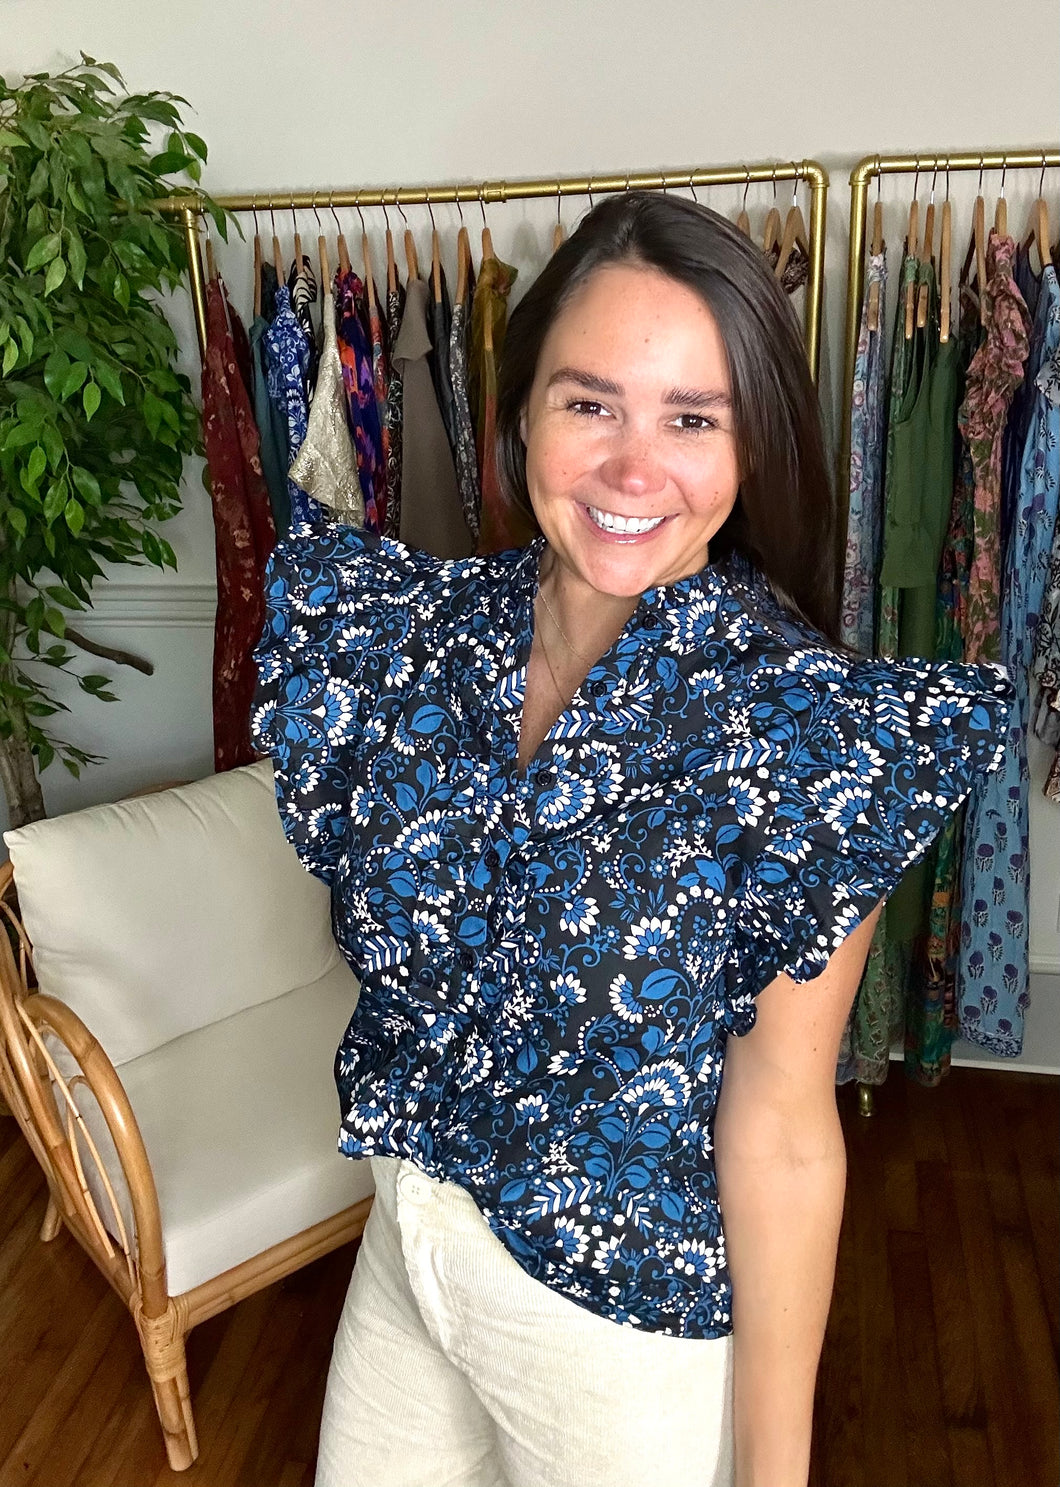 Dynamite floral printed indigo blouse. Double ruffle flutter sleeves, ruffle mock collar neckline with front function buttons with parallel ruffle detailing. Cotton. Covers most of front and backside, tailored to tuck well.  True to size, wearing size x-small.   